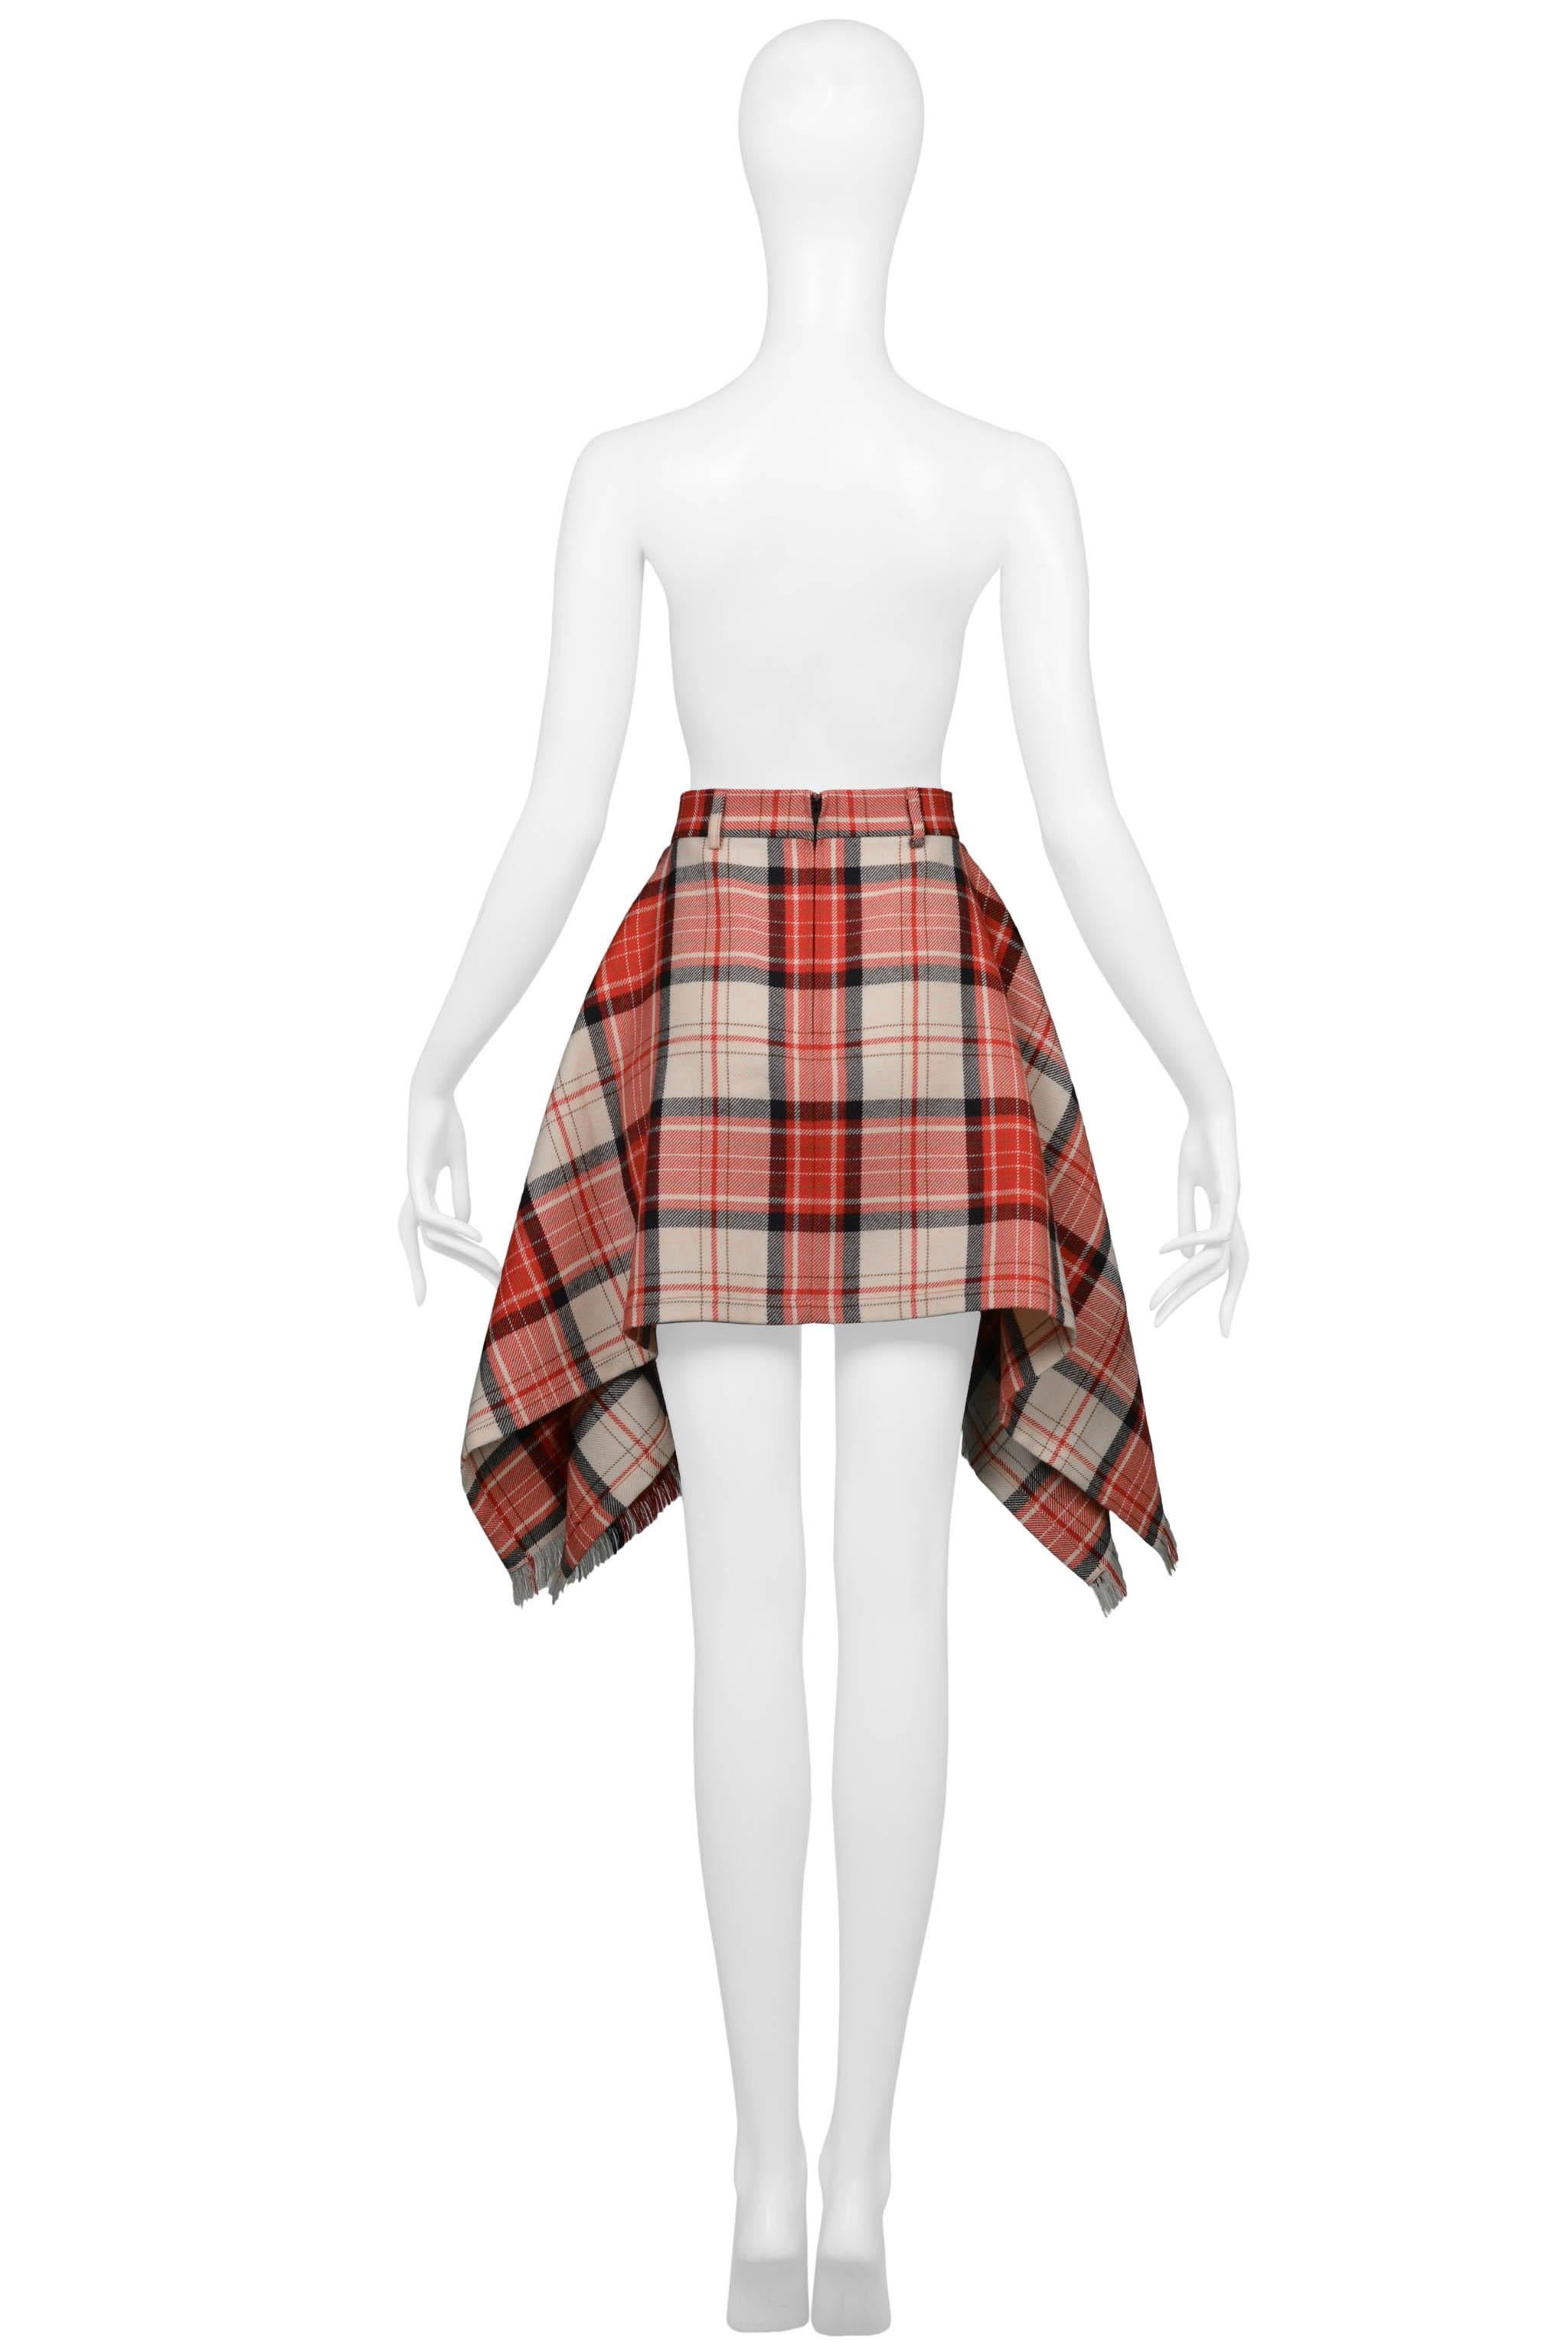 Jean Paul Gaultier Red & White Plaid Blanket Skirt 1991 In Excellent Condition For Sale In Los Angeles, CA